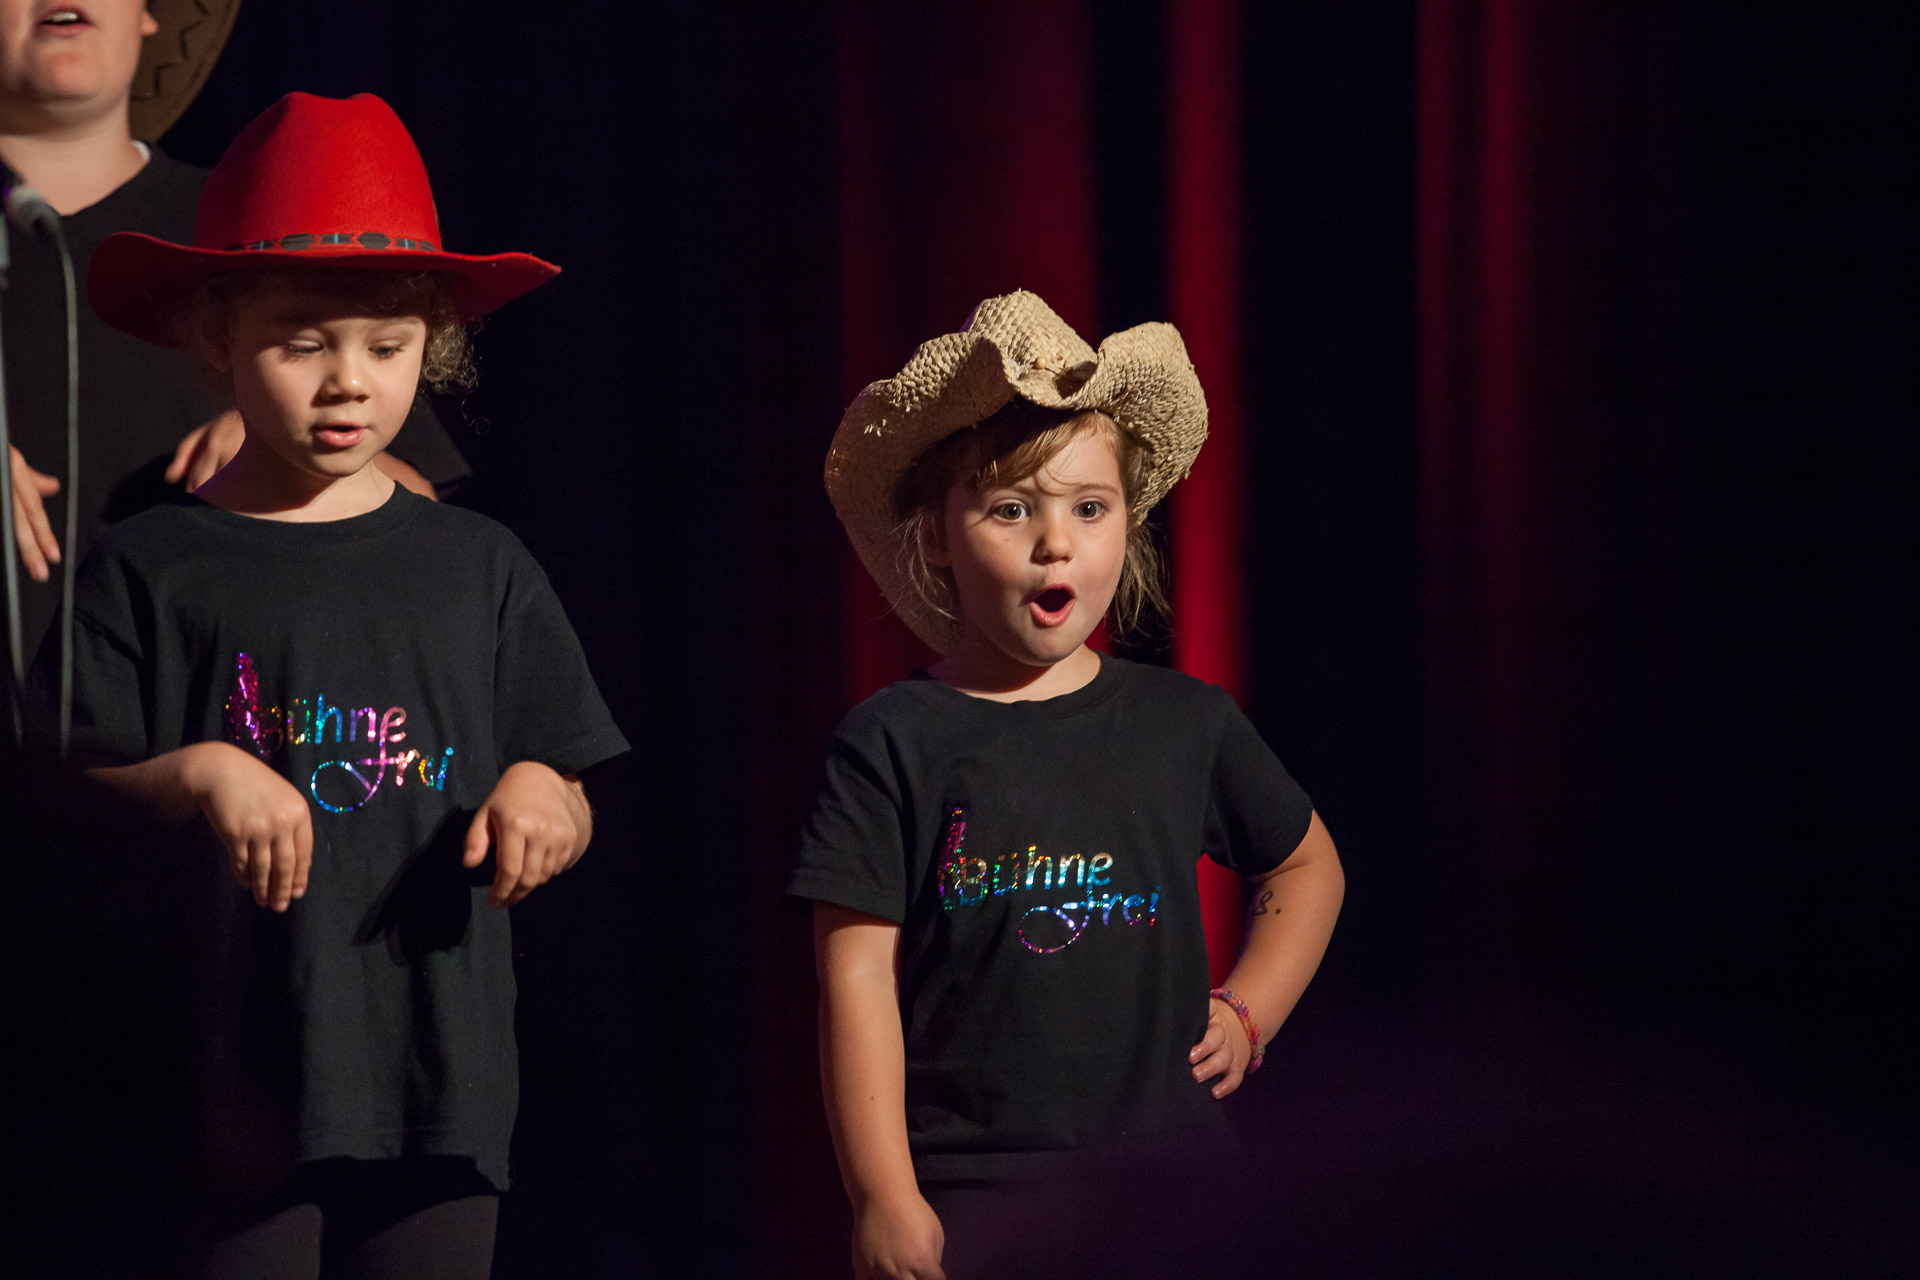 Musical Theater Kids Company-Buehne frei Speyer